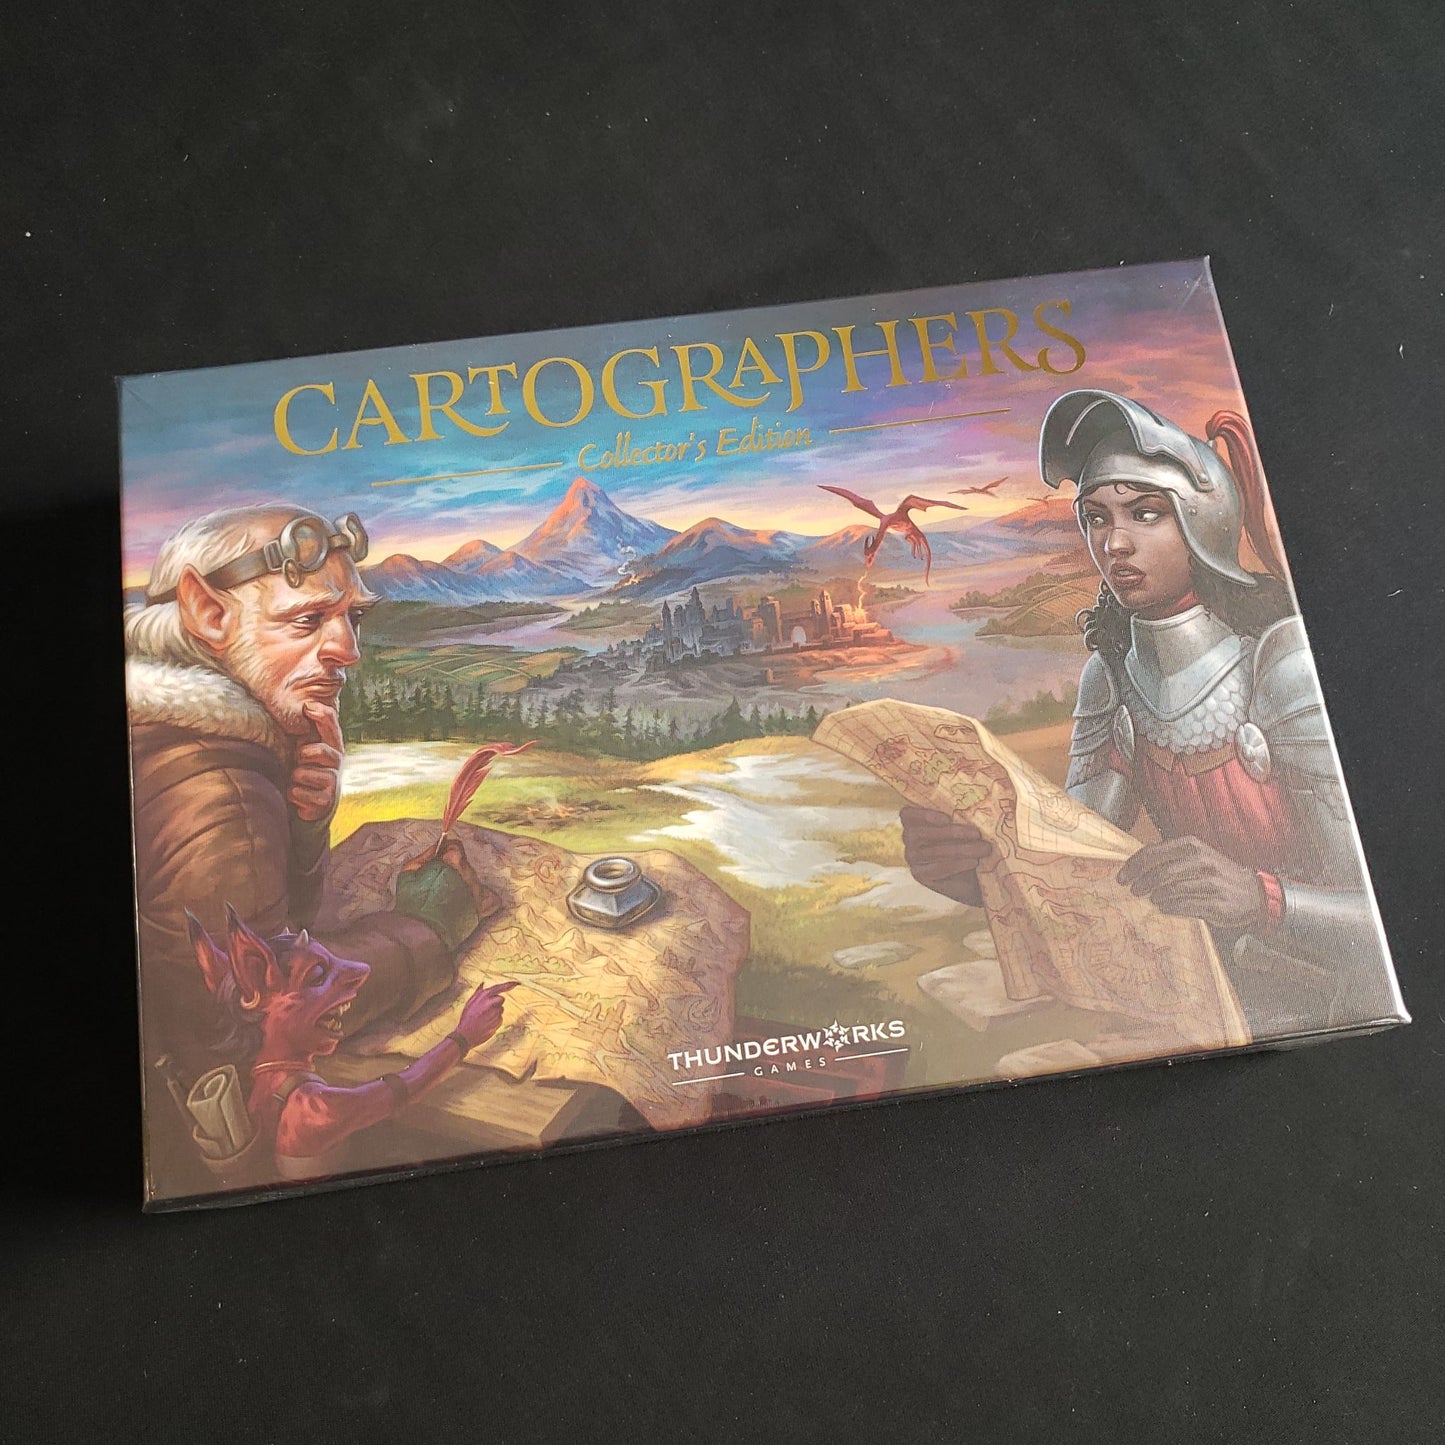 Image shows the front cover of the box of the Cartographers Heroes: Collector's Edition board game